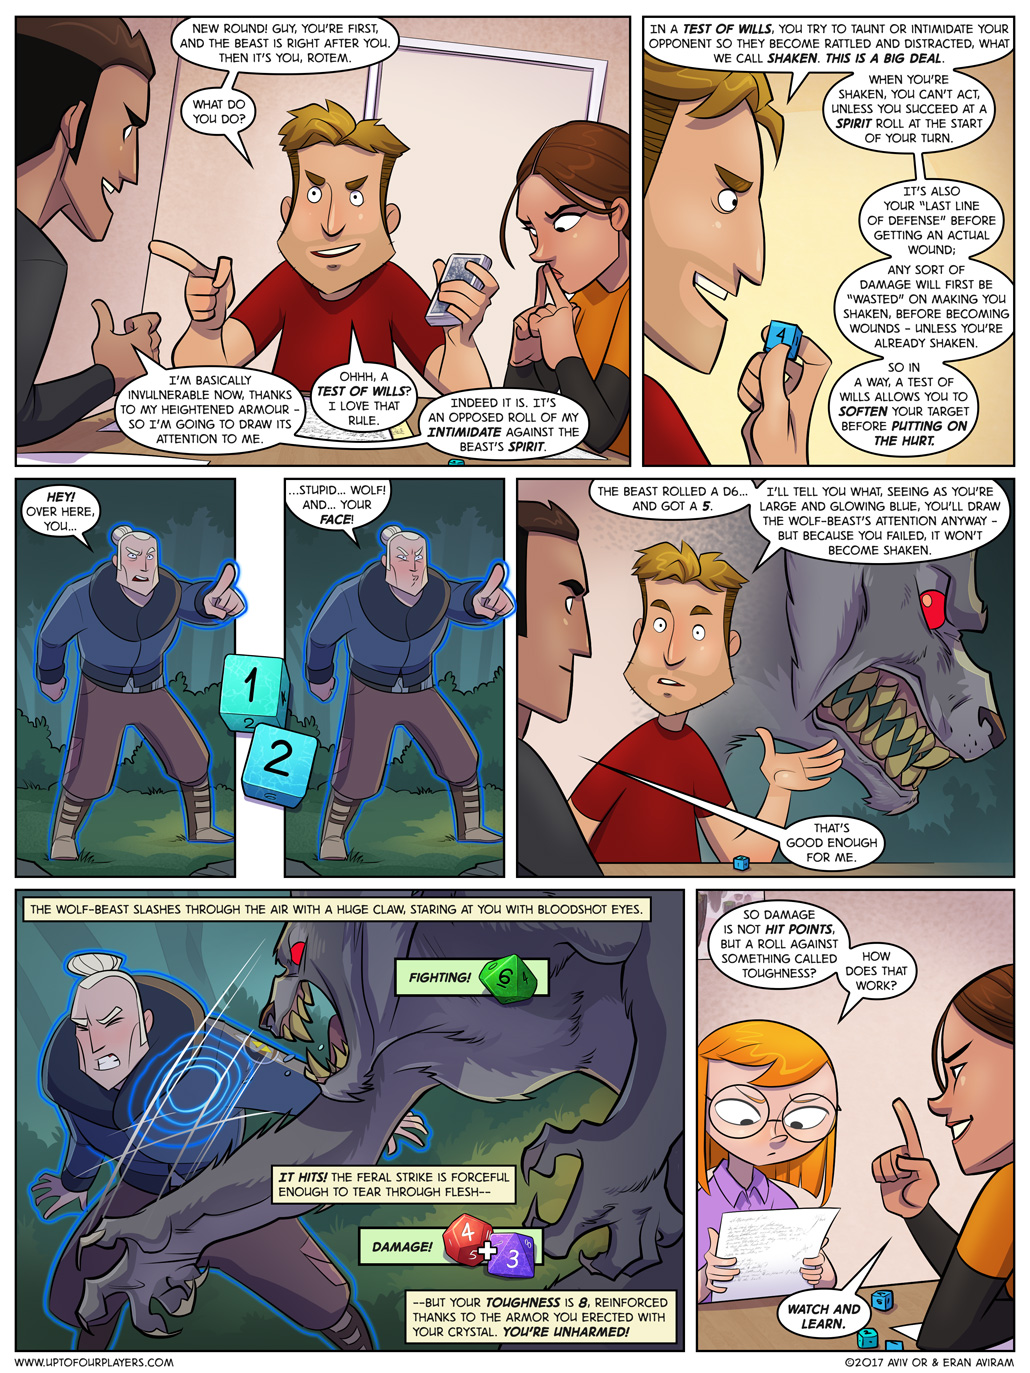 Wild at Heart – Page 9